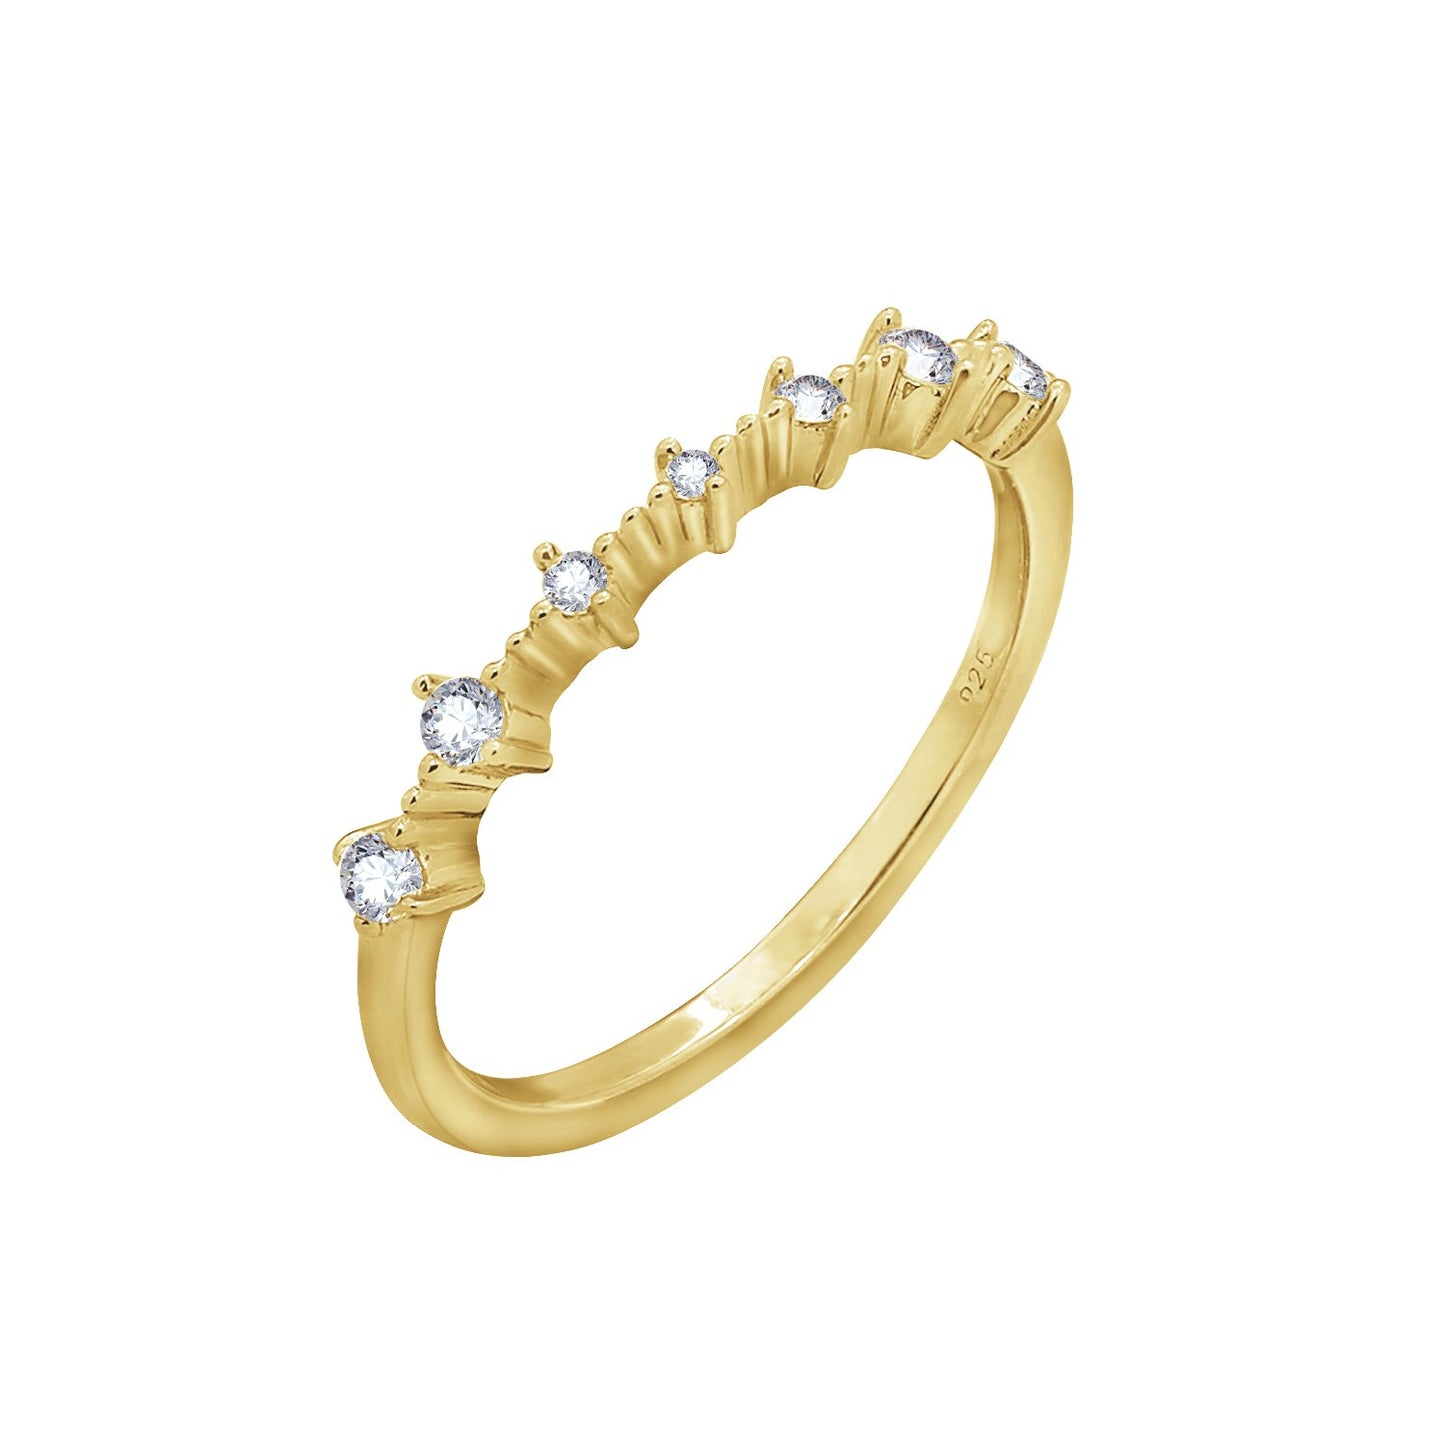 KIERA COUTURE RING BAR White Baguette Cut Yellow Gold Plated Sterling Silver 7-Stone Stackable Ring